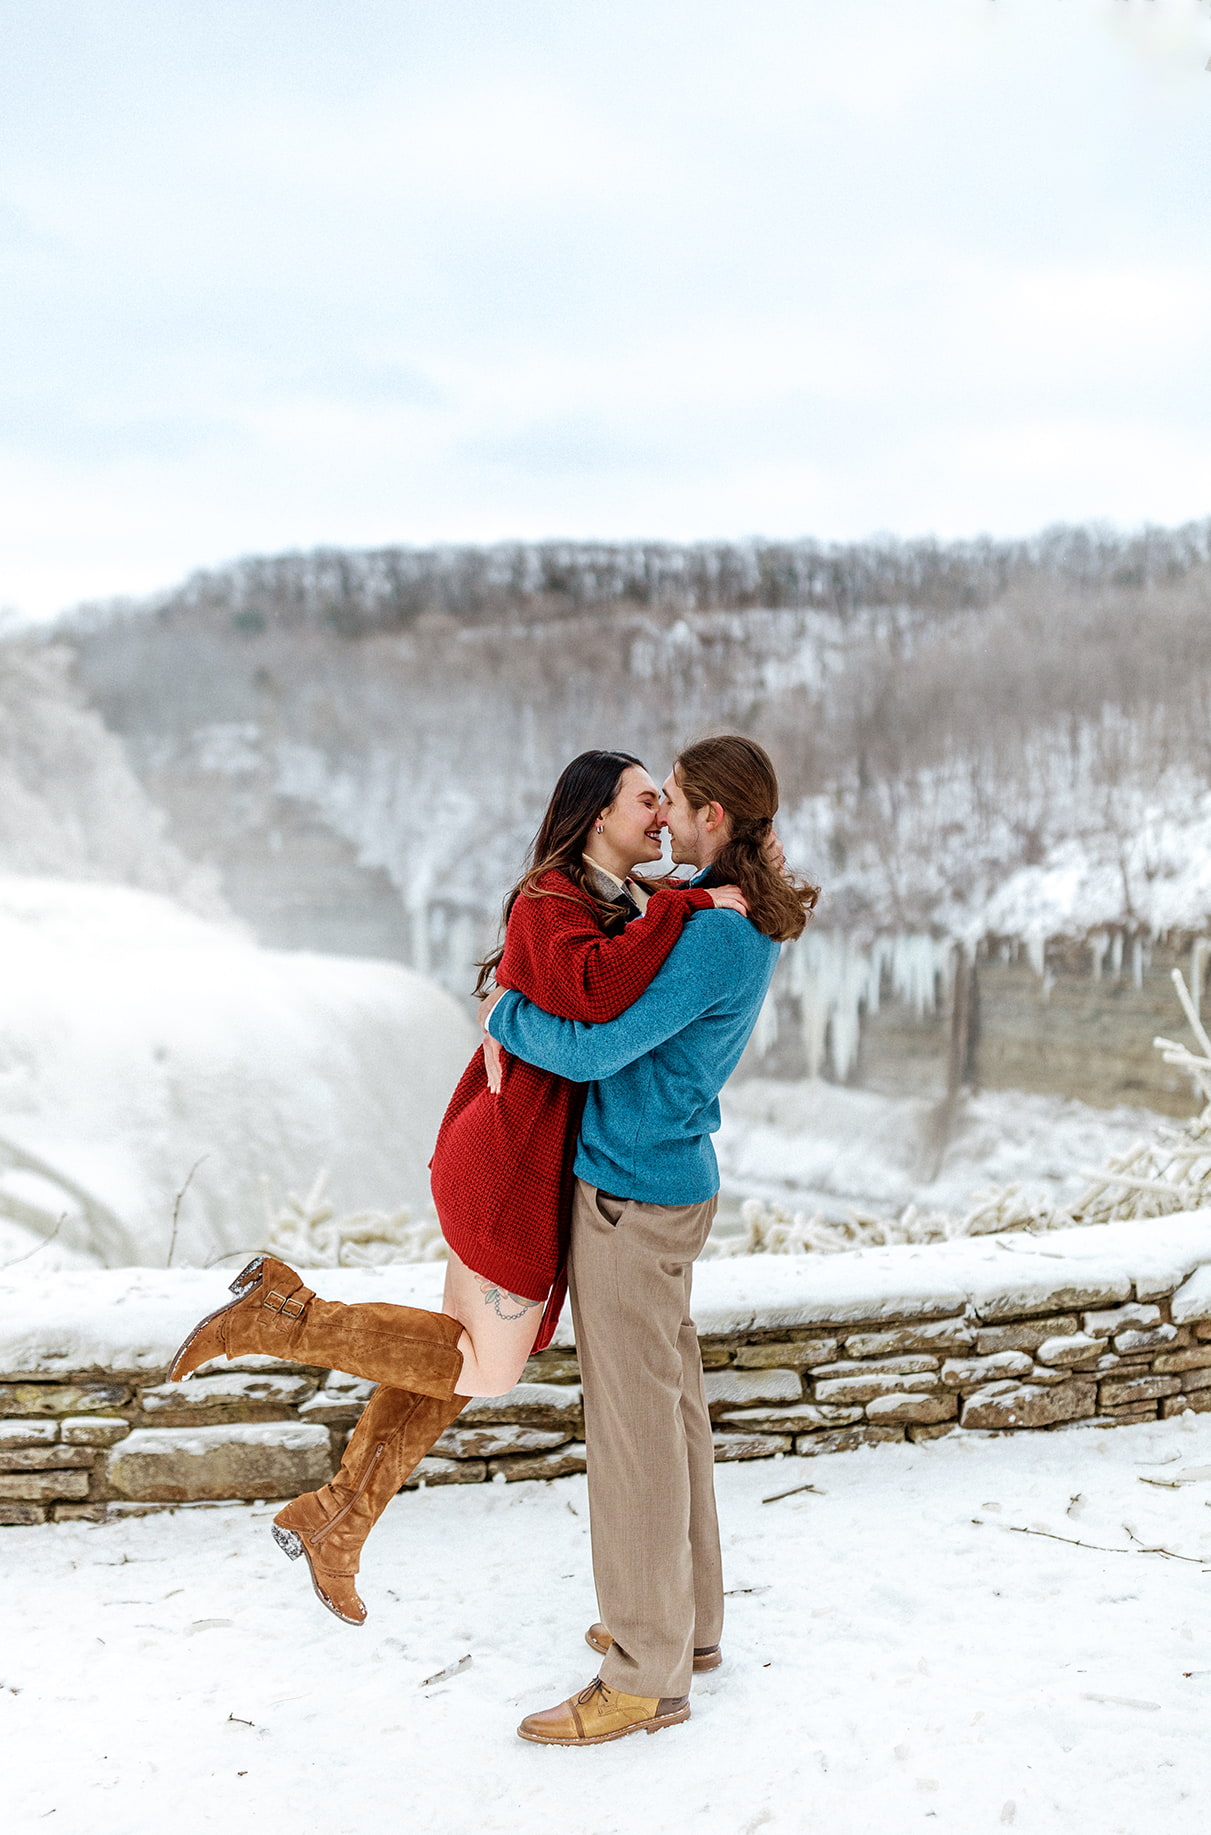 Man in blue sweater lifts woman in red dress in front of icy winter backdrop for upstate ny engagement photos